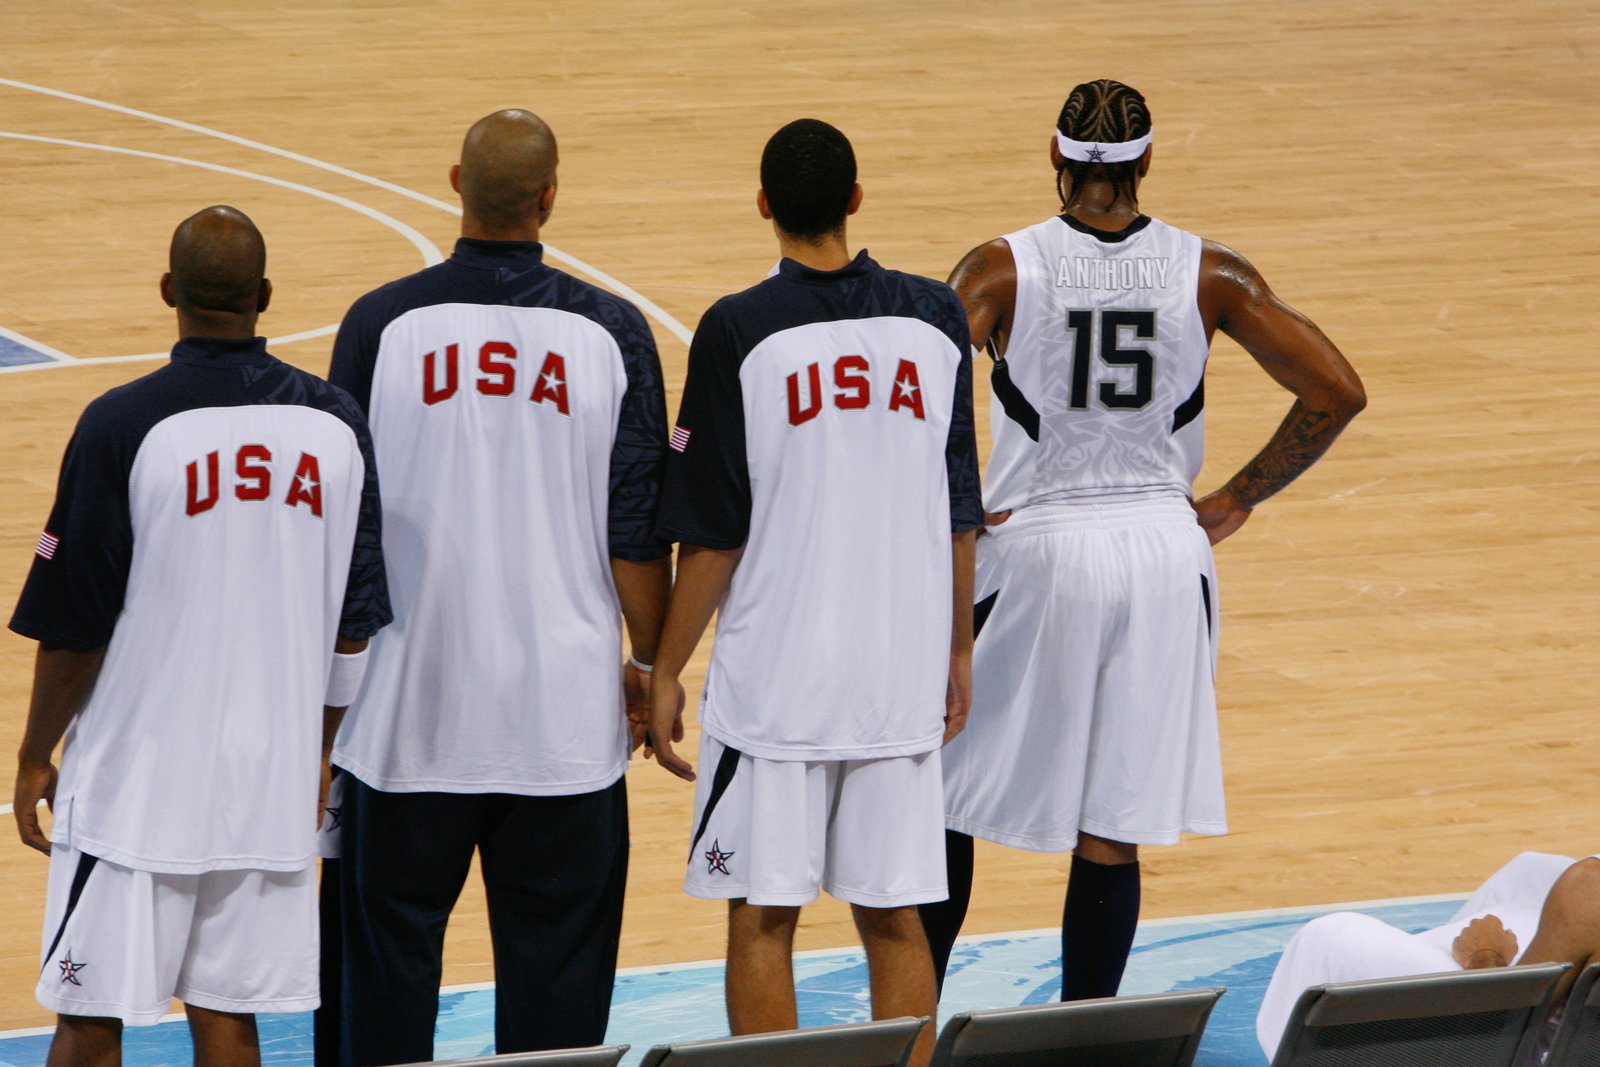 Renewed focus on a Balanced Roster for Team USA